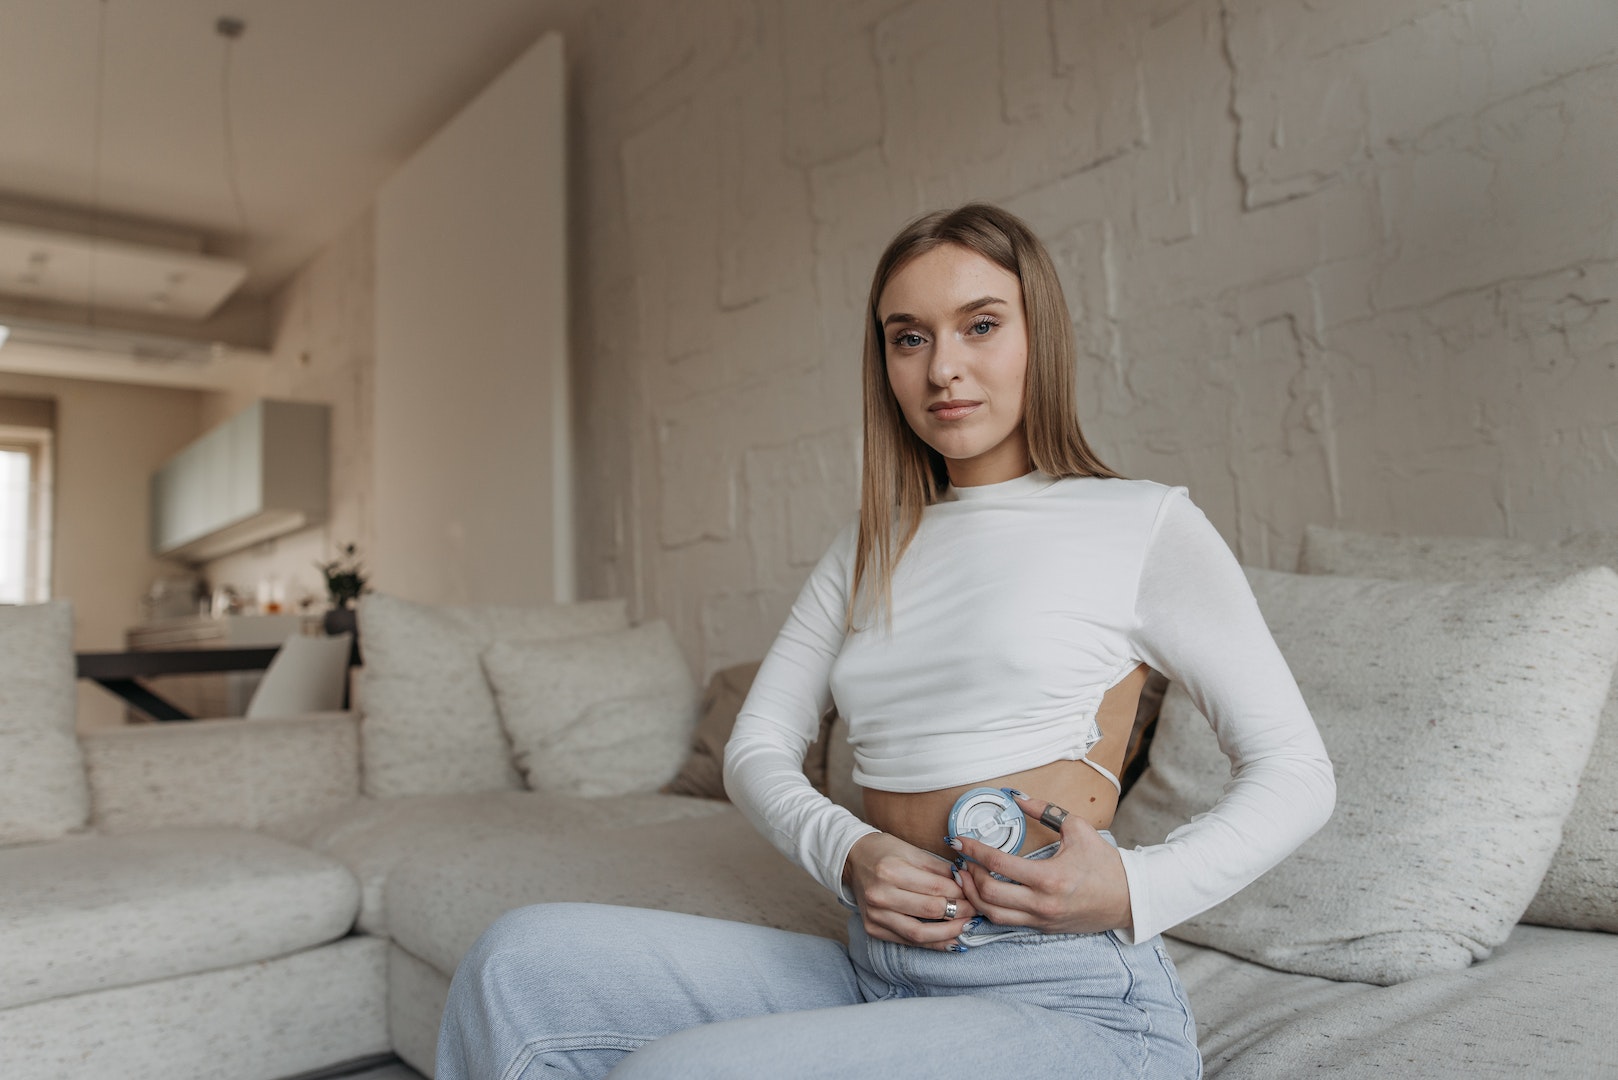 Woman in White Long Sleeve Shirt and Blue Denim Jeans Sitting on Gray Couch